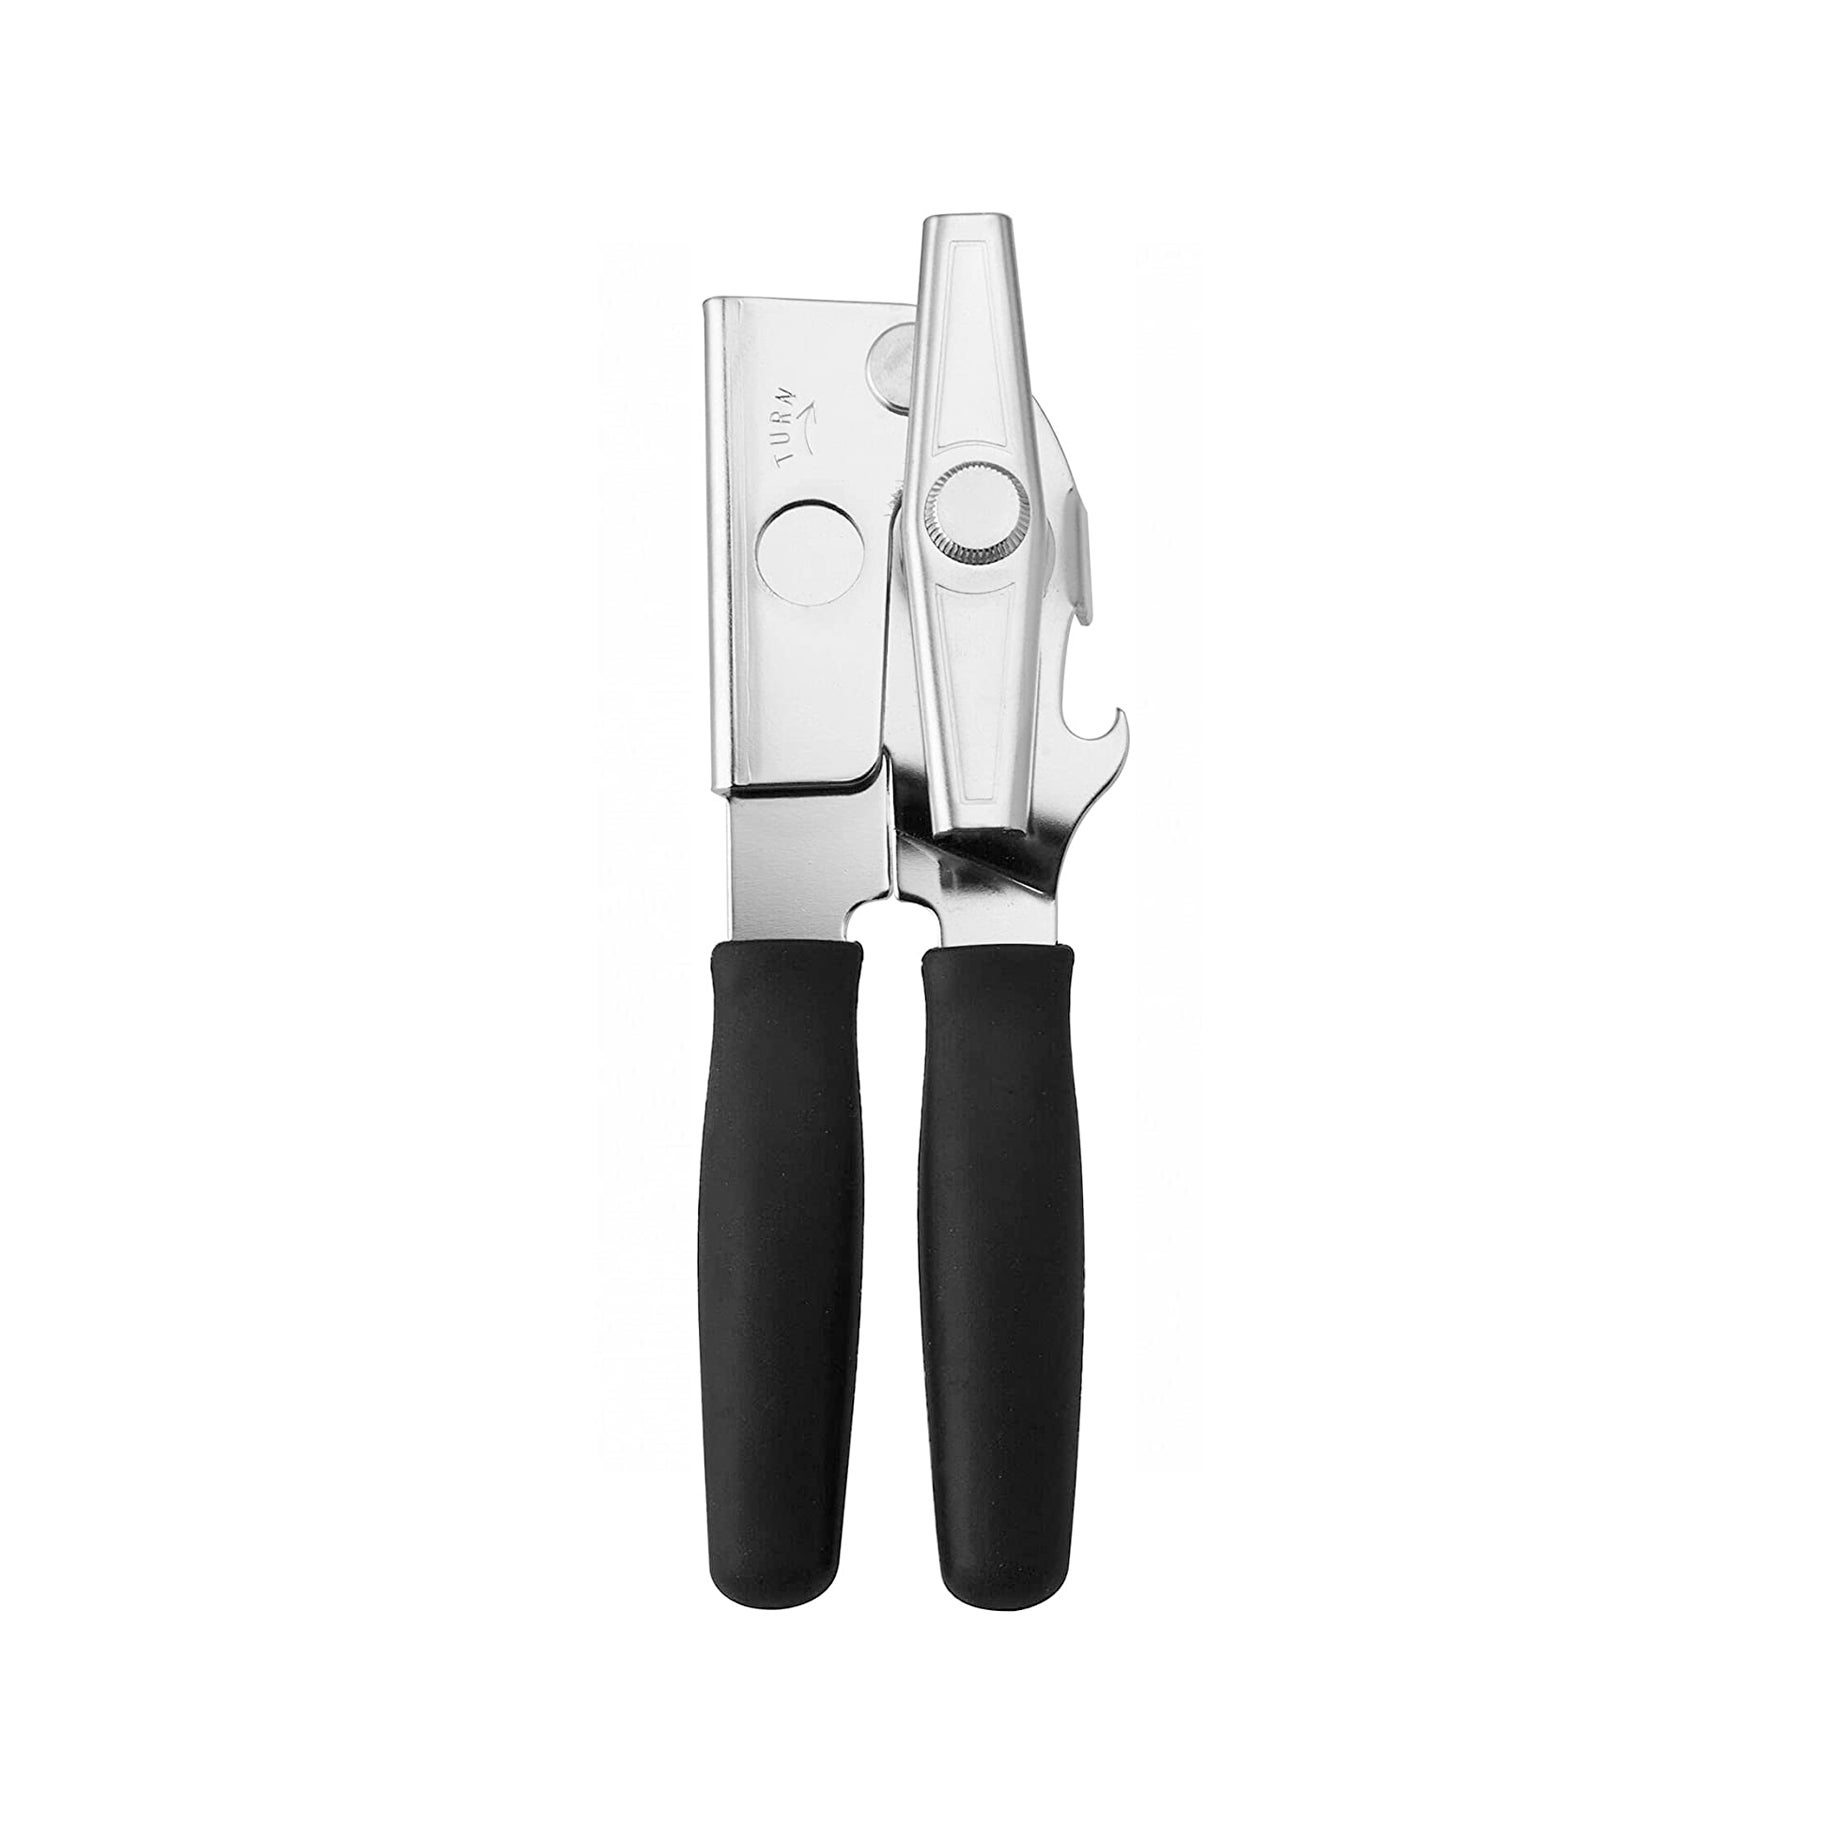 https://www.saveur.com/uploads/2021/08/16/The-Best-Manual-Can-Opener-Option-Swing-A-Way-Portable-Can-Opener.jpg?auto=webp